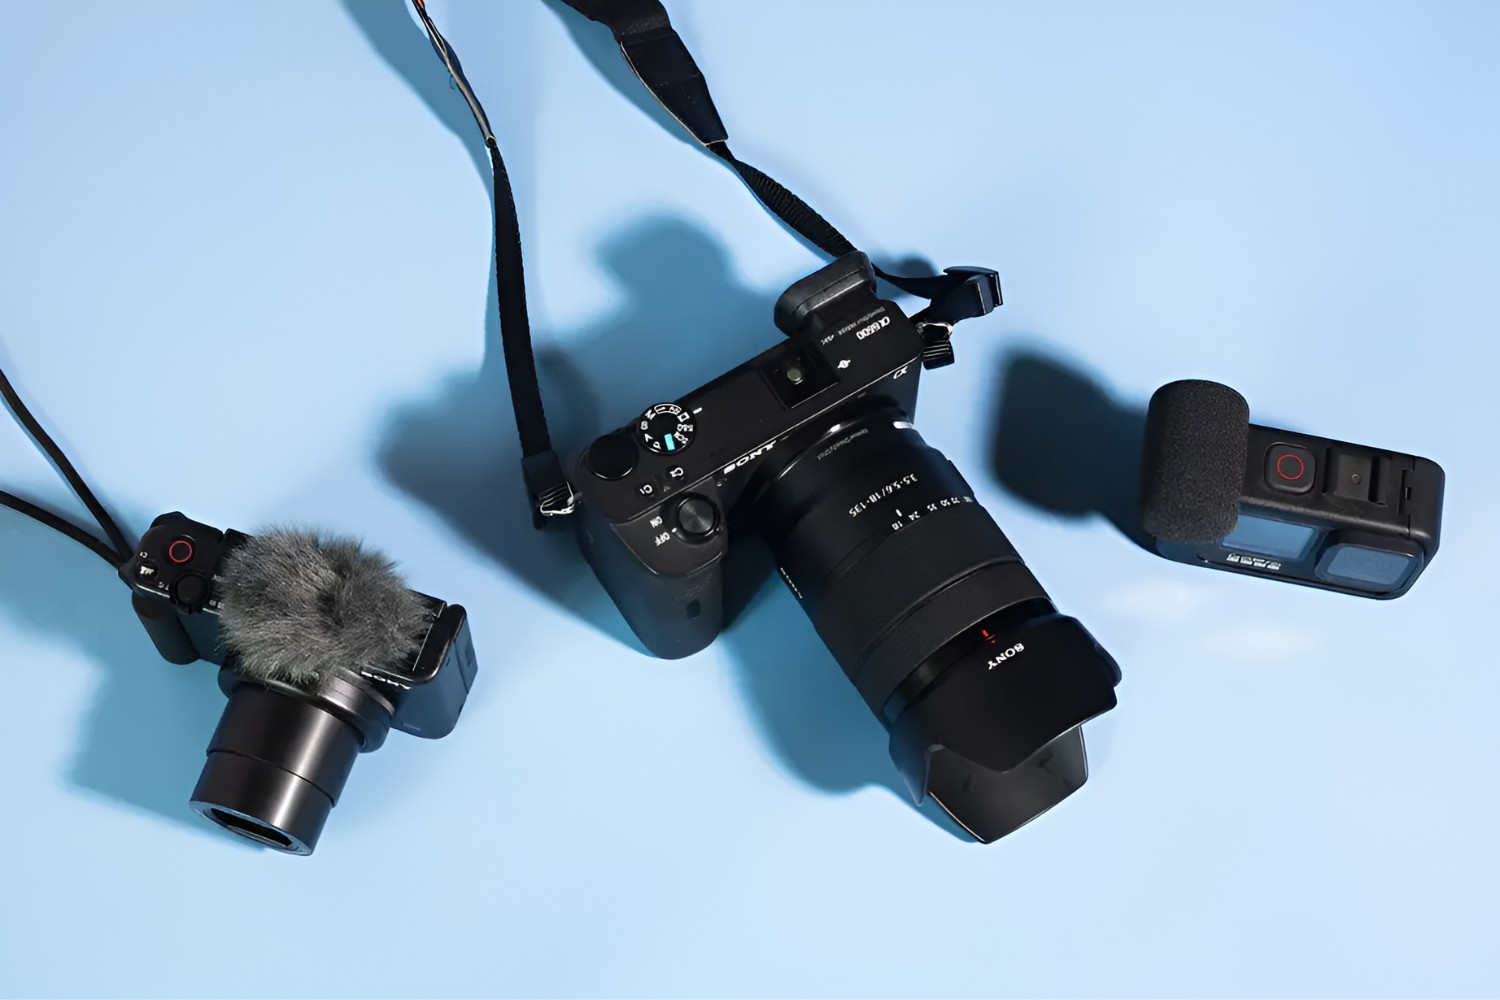 Which Sony DSLR Camera Records Video